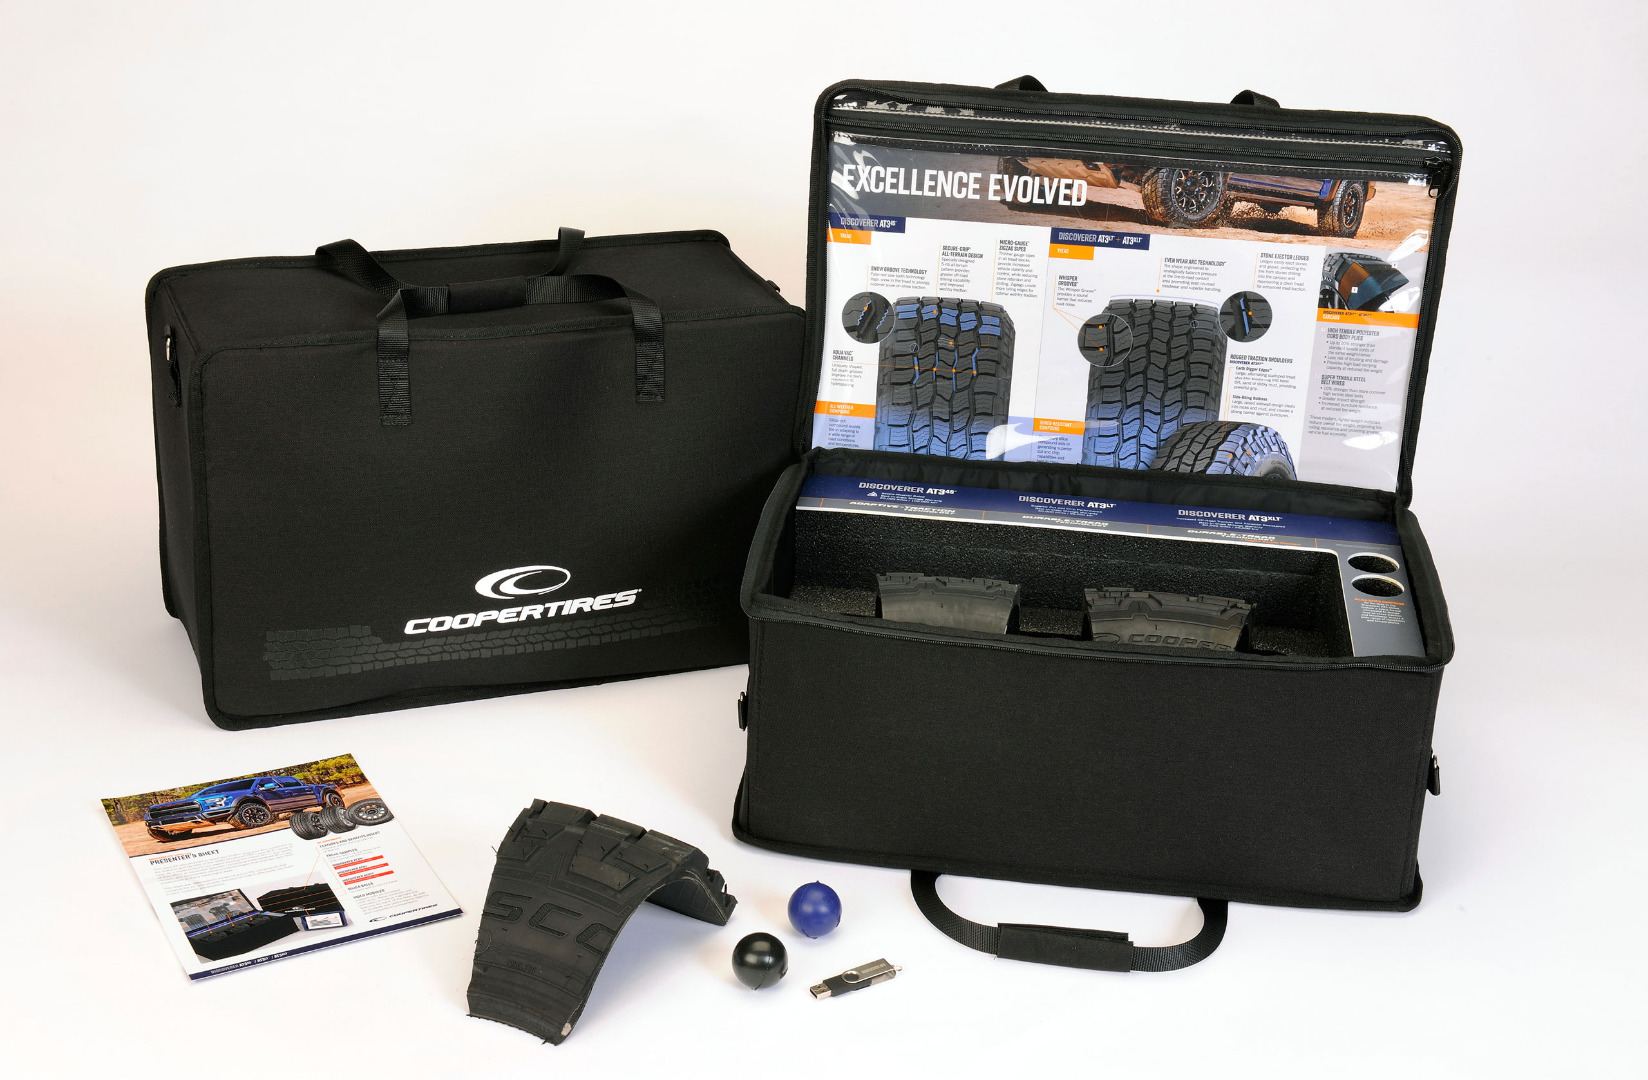 Kit created for Cooper Tire's sales team to sell the new Discoverer AT3 line of tires.